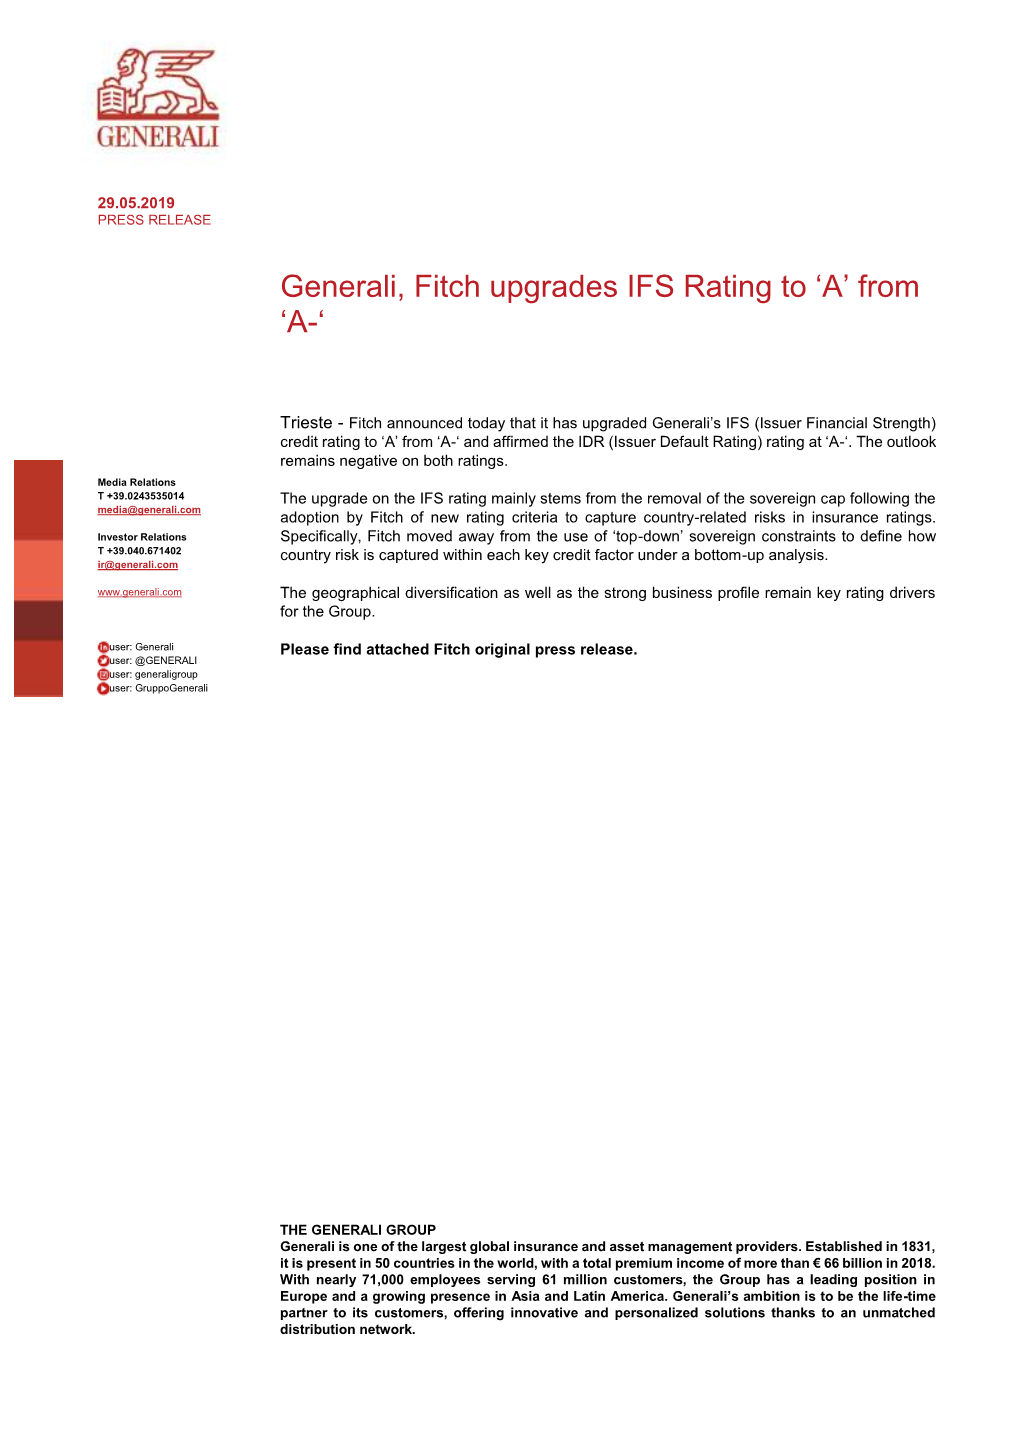 Generali, Fitch Upgrades IFS Rating to 'A' from 'A-'